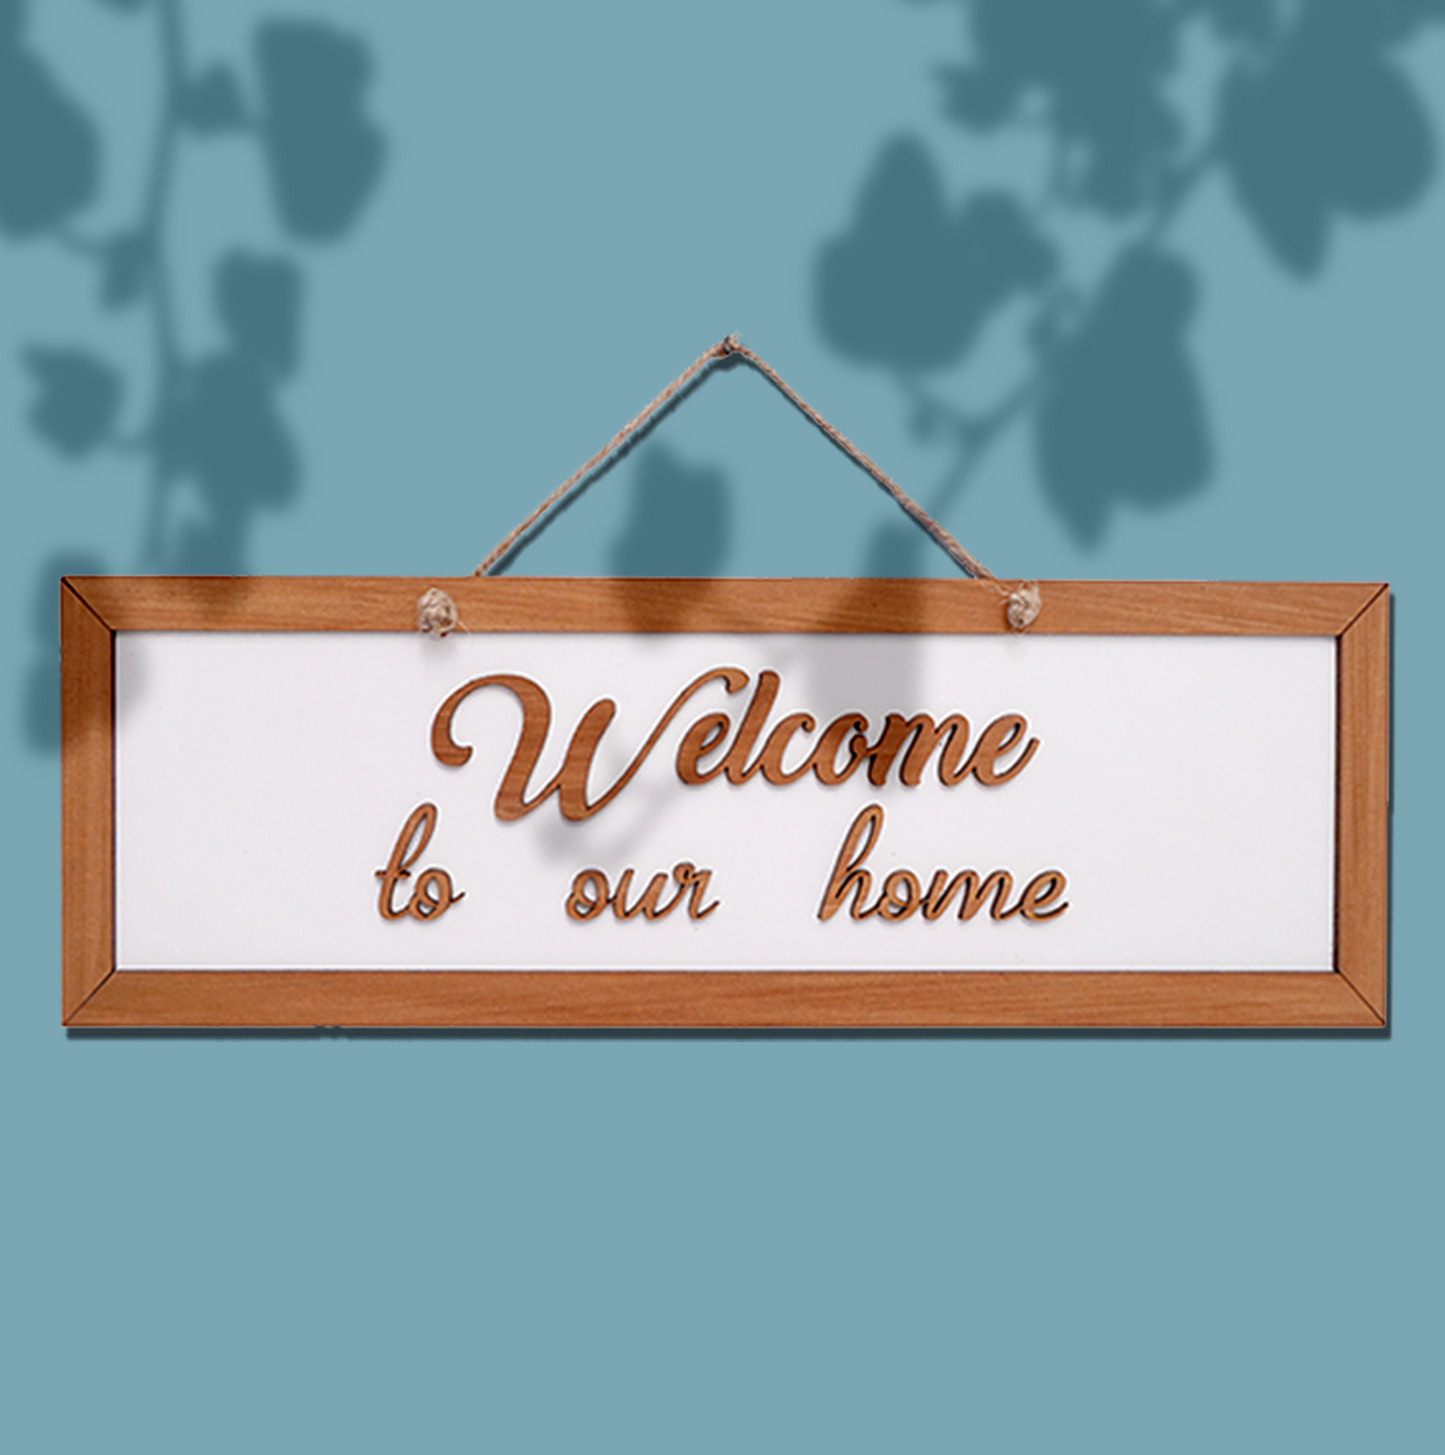 Welcome To Our Home Wooden Door and Wall Hanging